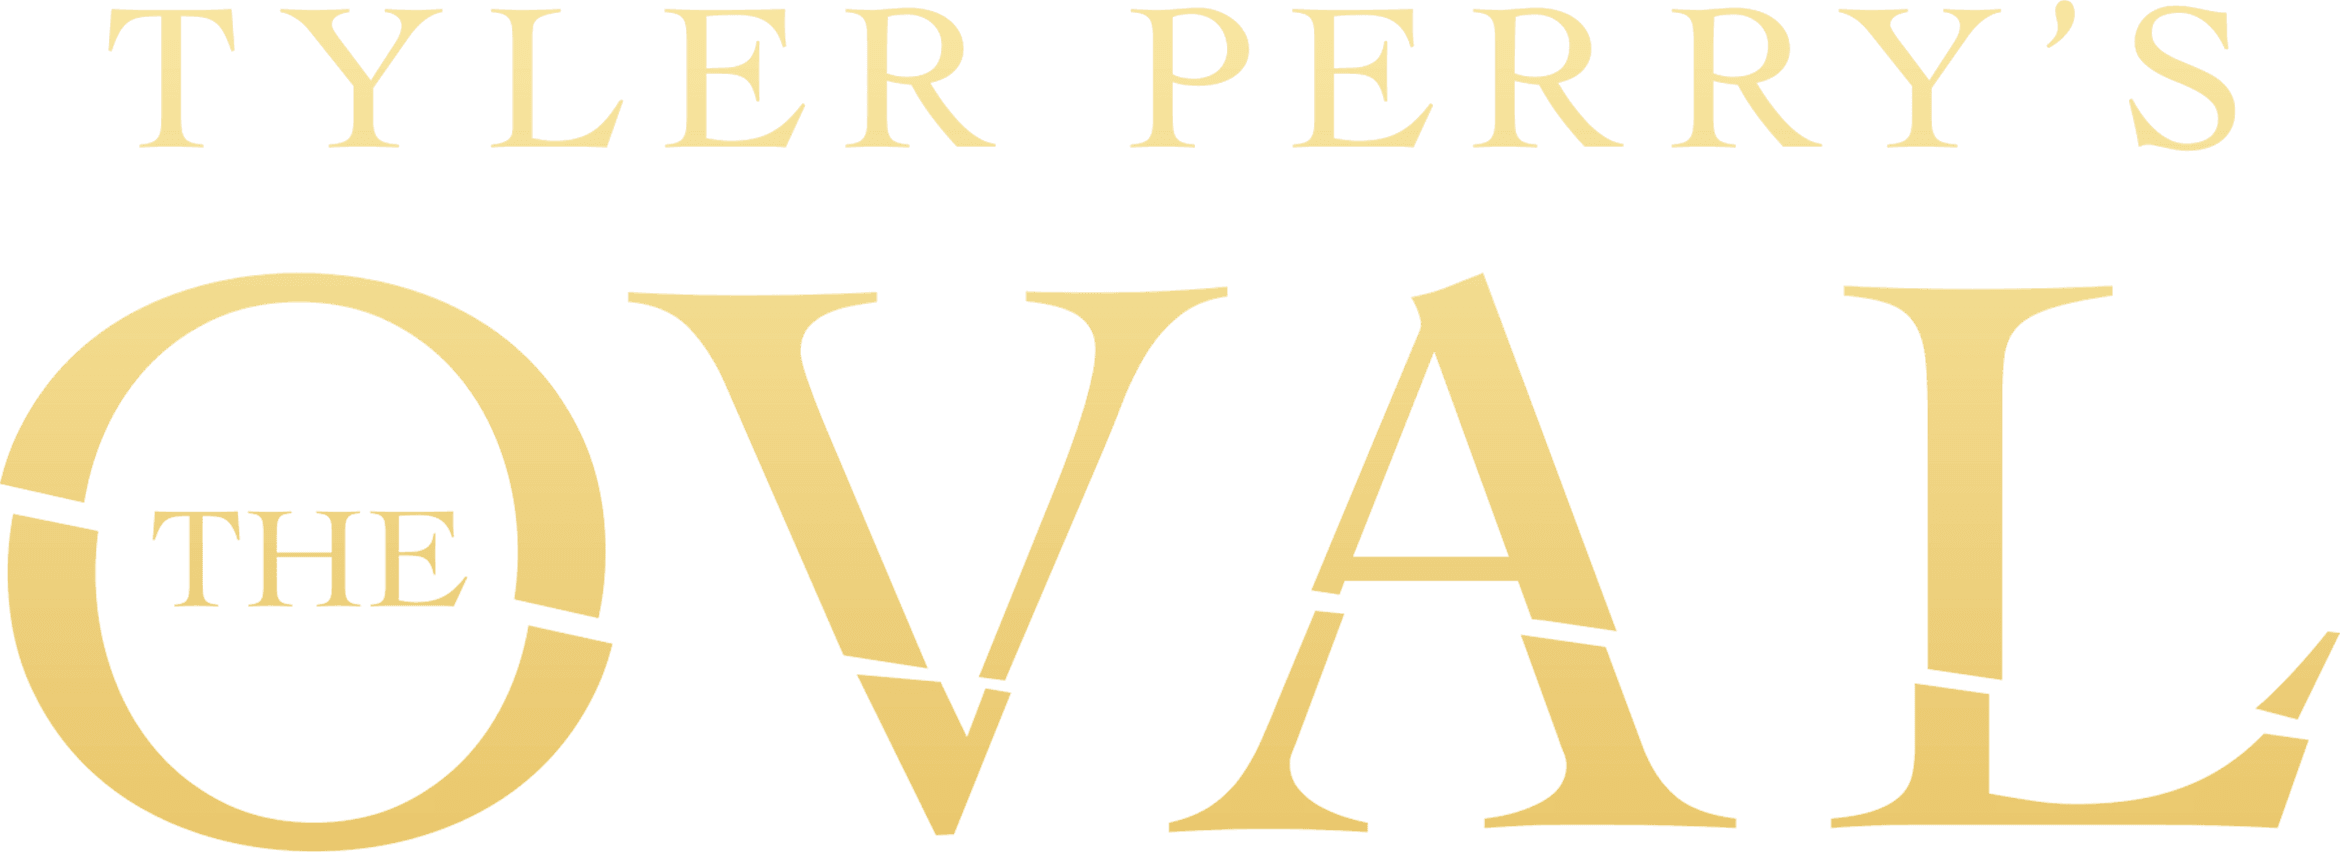 Tyler Perry's The Oval logo